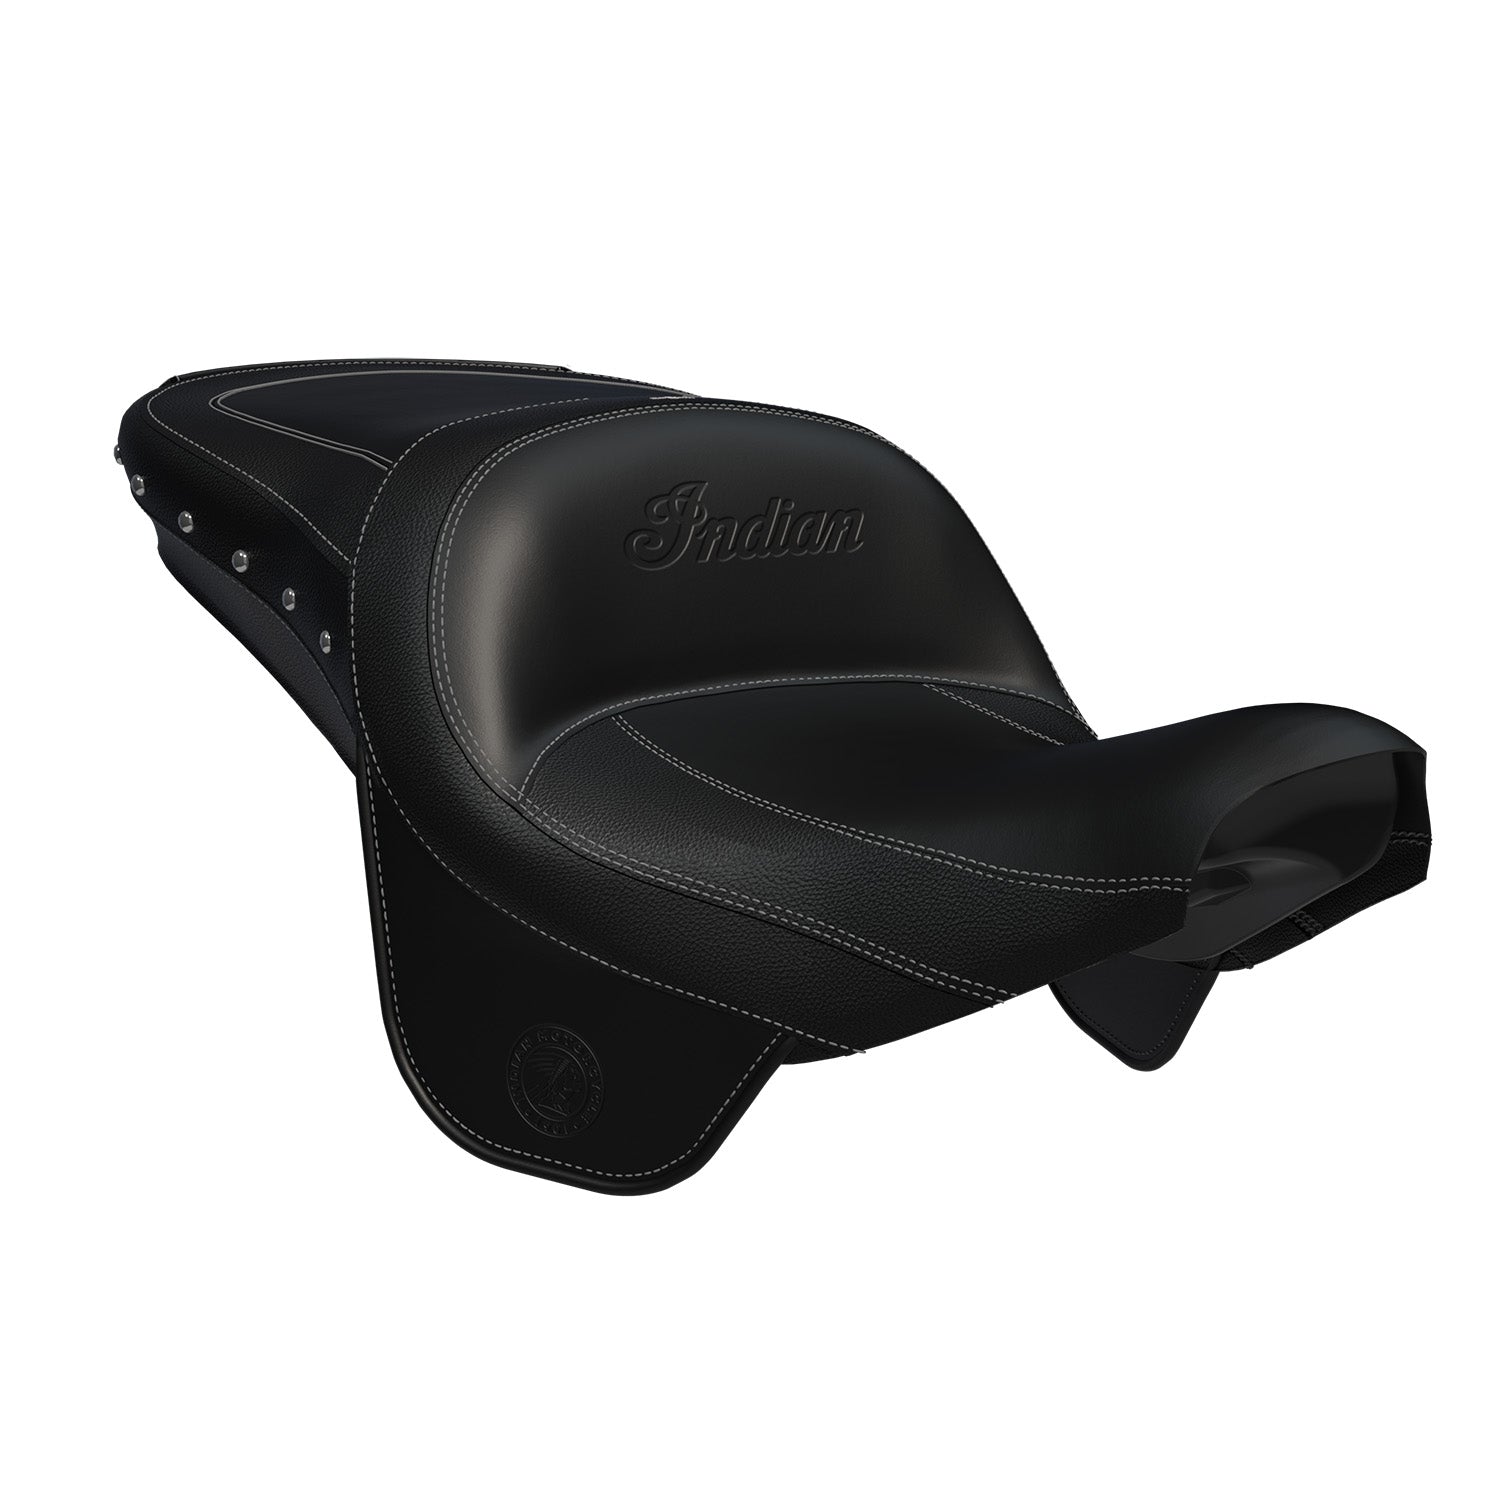 ClimaCommand Classic Seat, Ride Command Enabled, Black